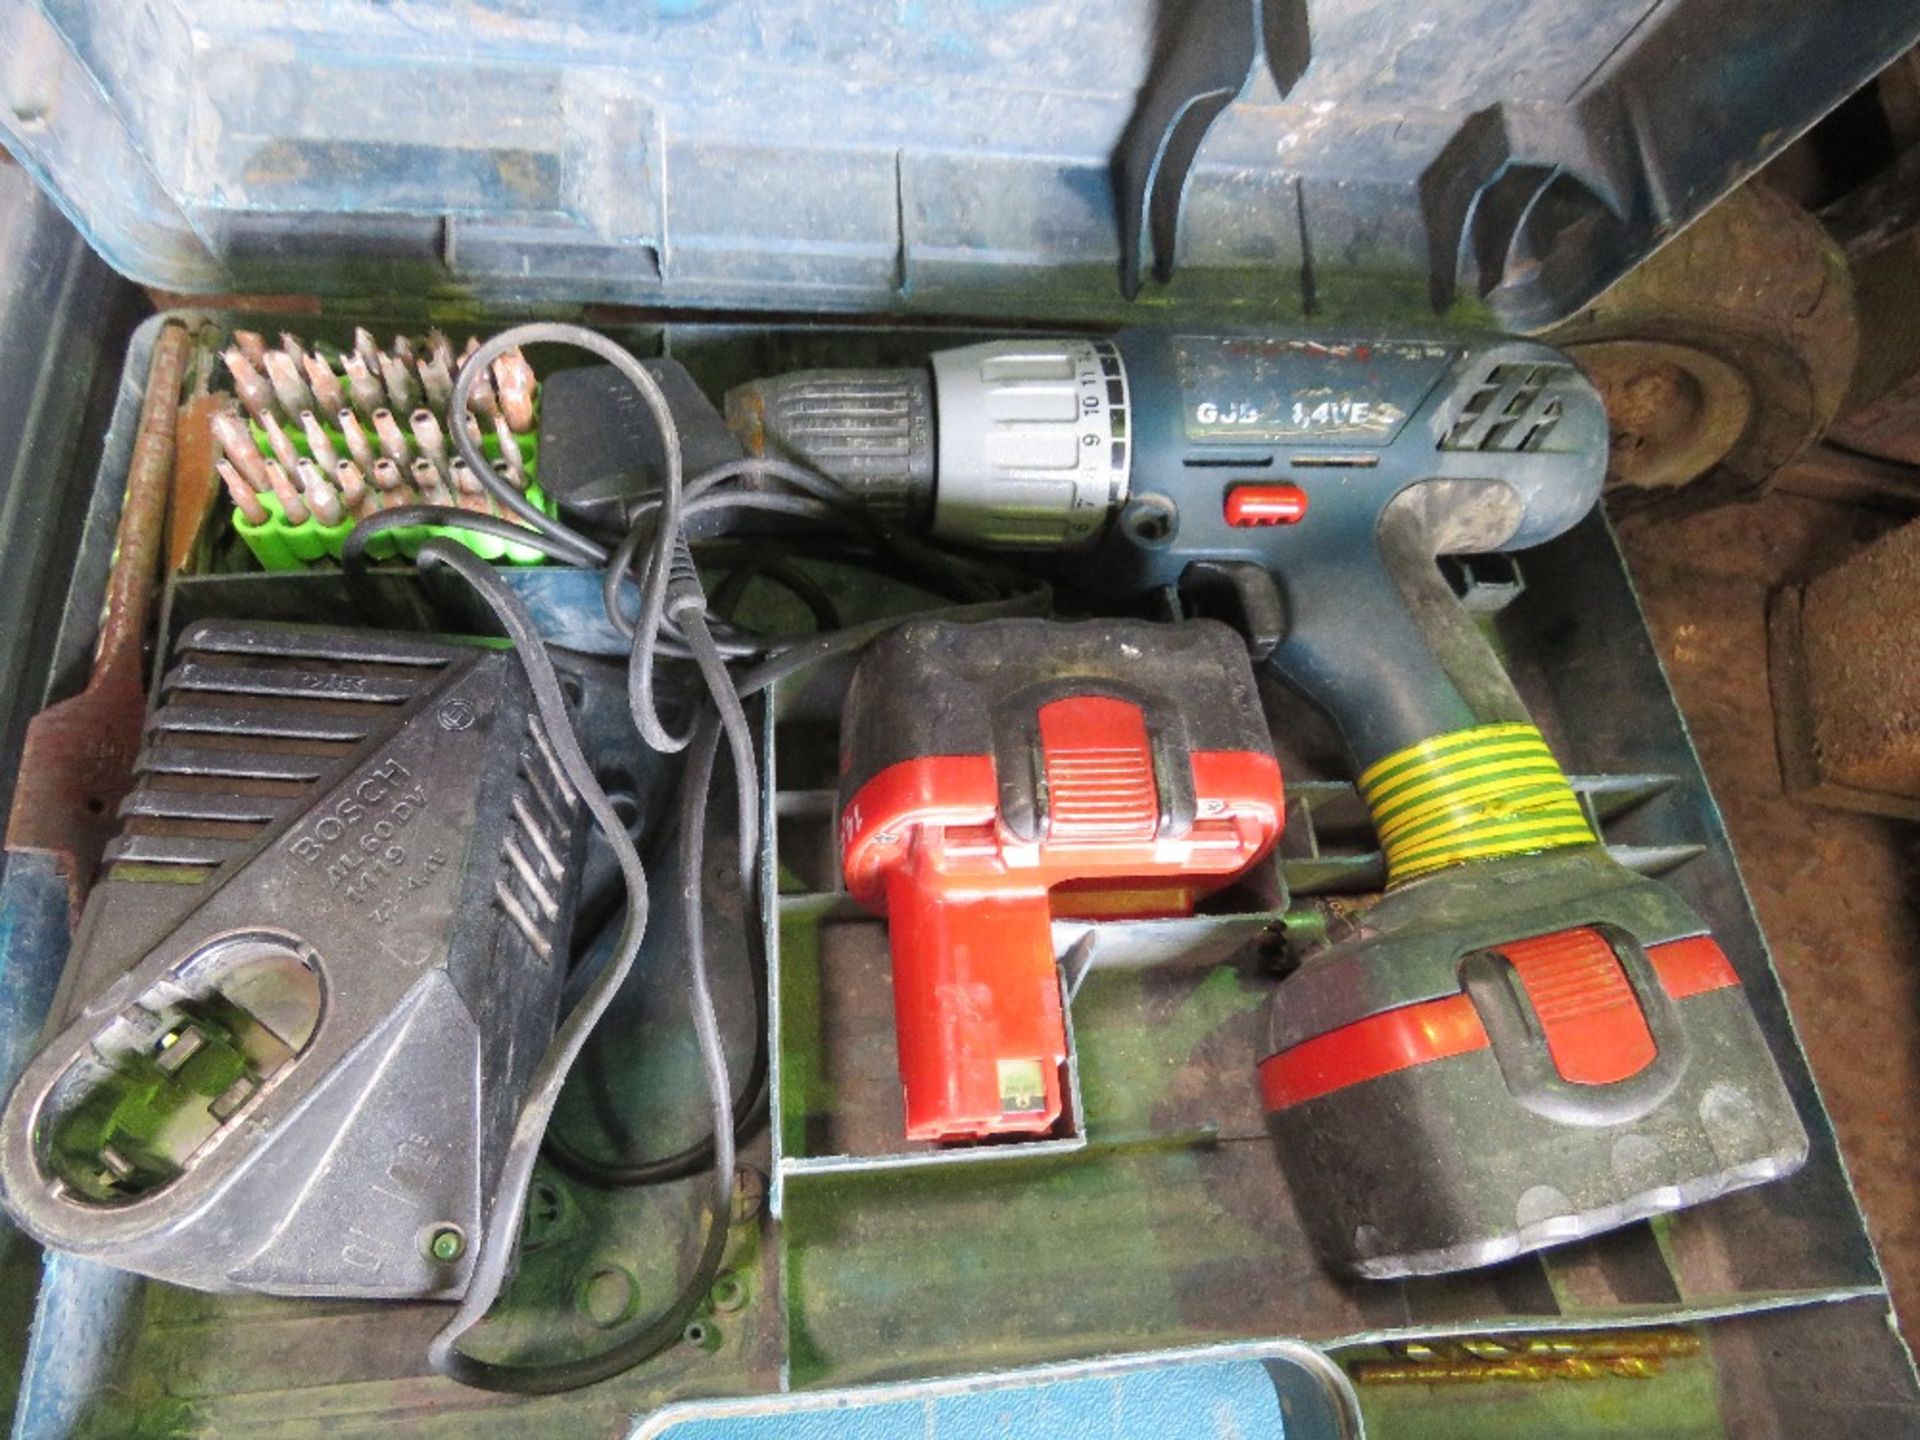 2 X BATTERY DRILLS, MAKITA AND BOSCH. - Image 2 of 3